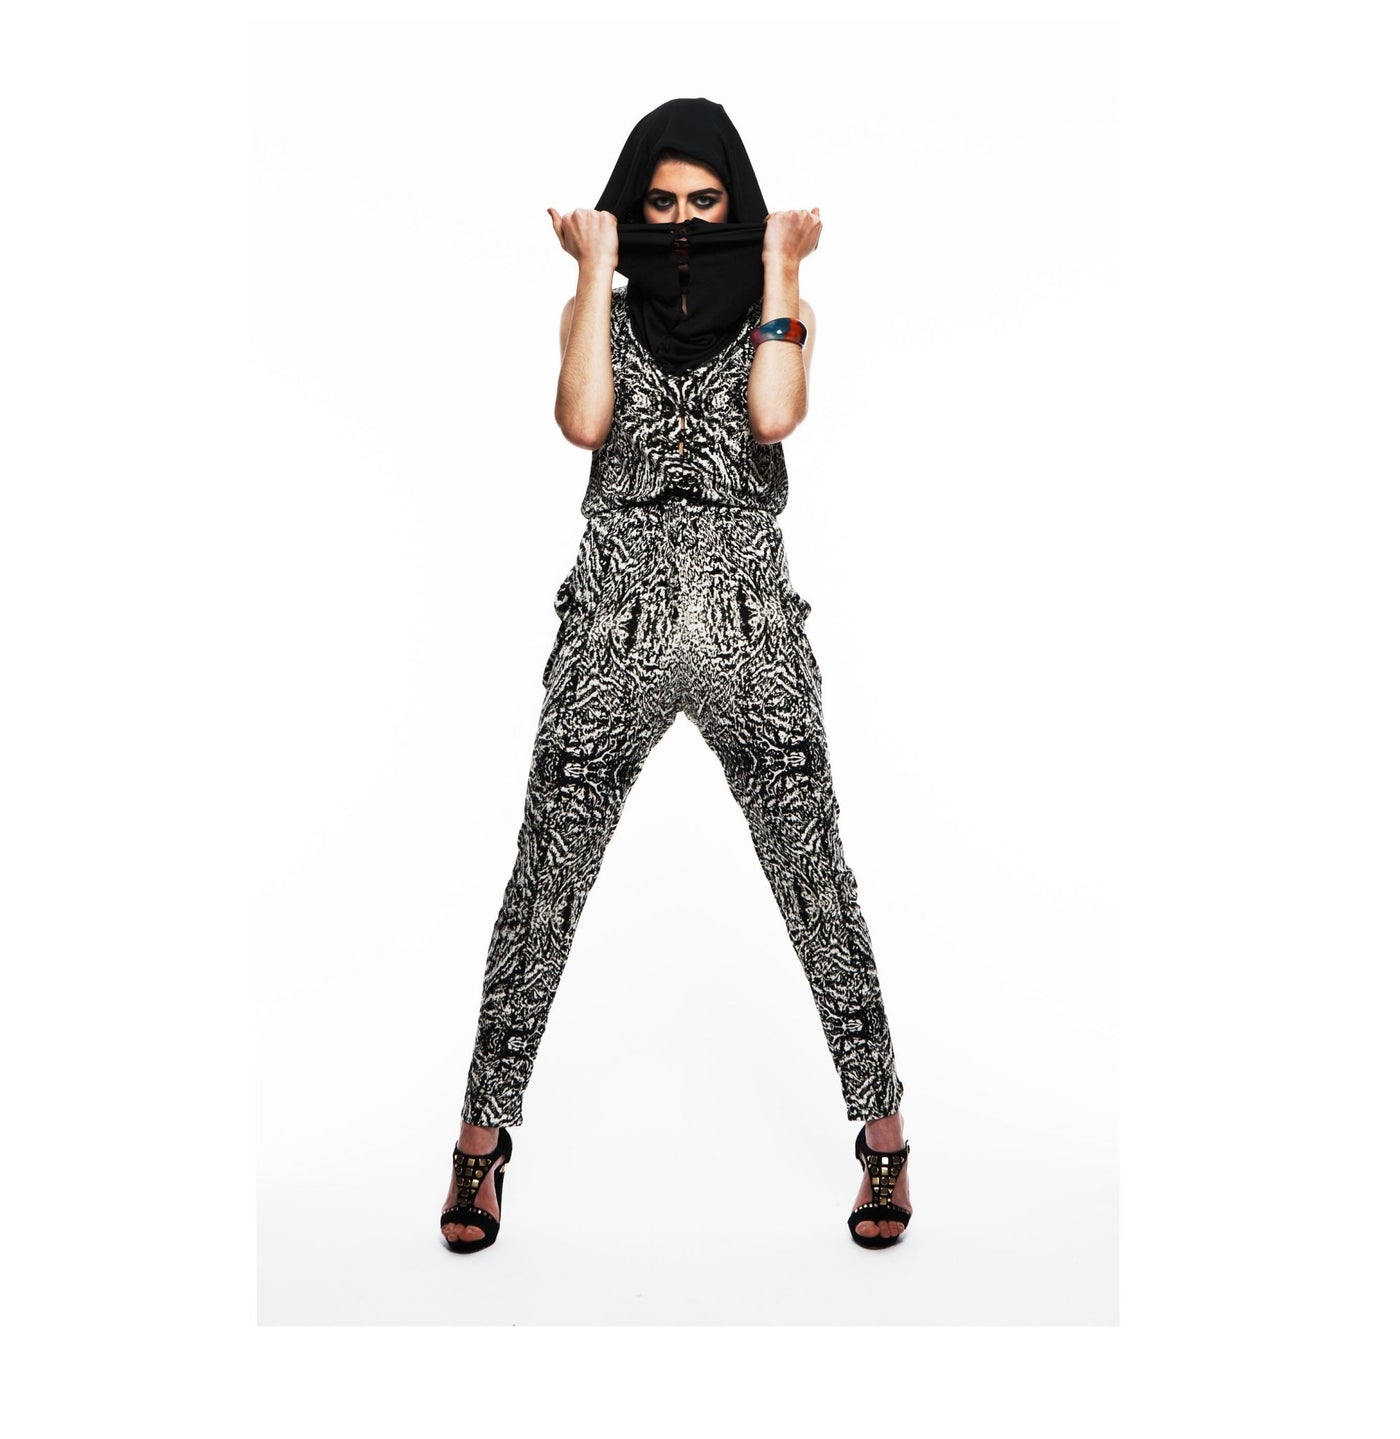 Ash Jumpsuit - The Clothing LoungeTramp in Disguise